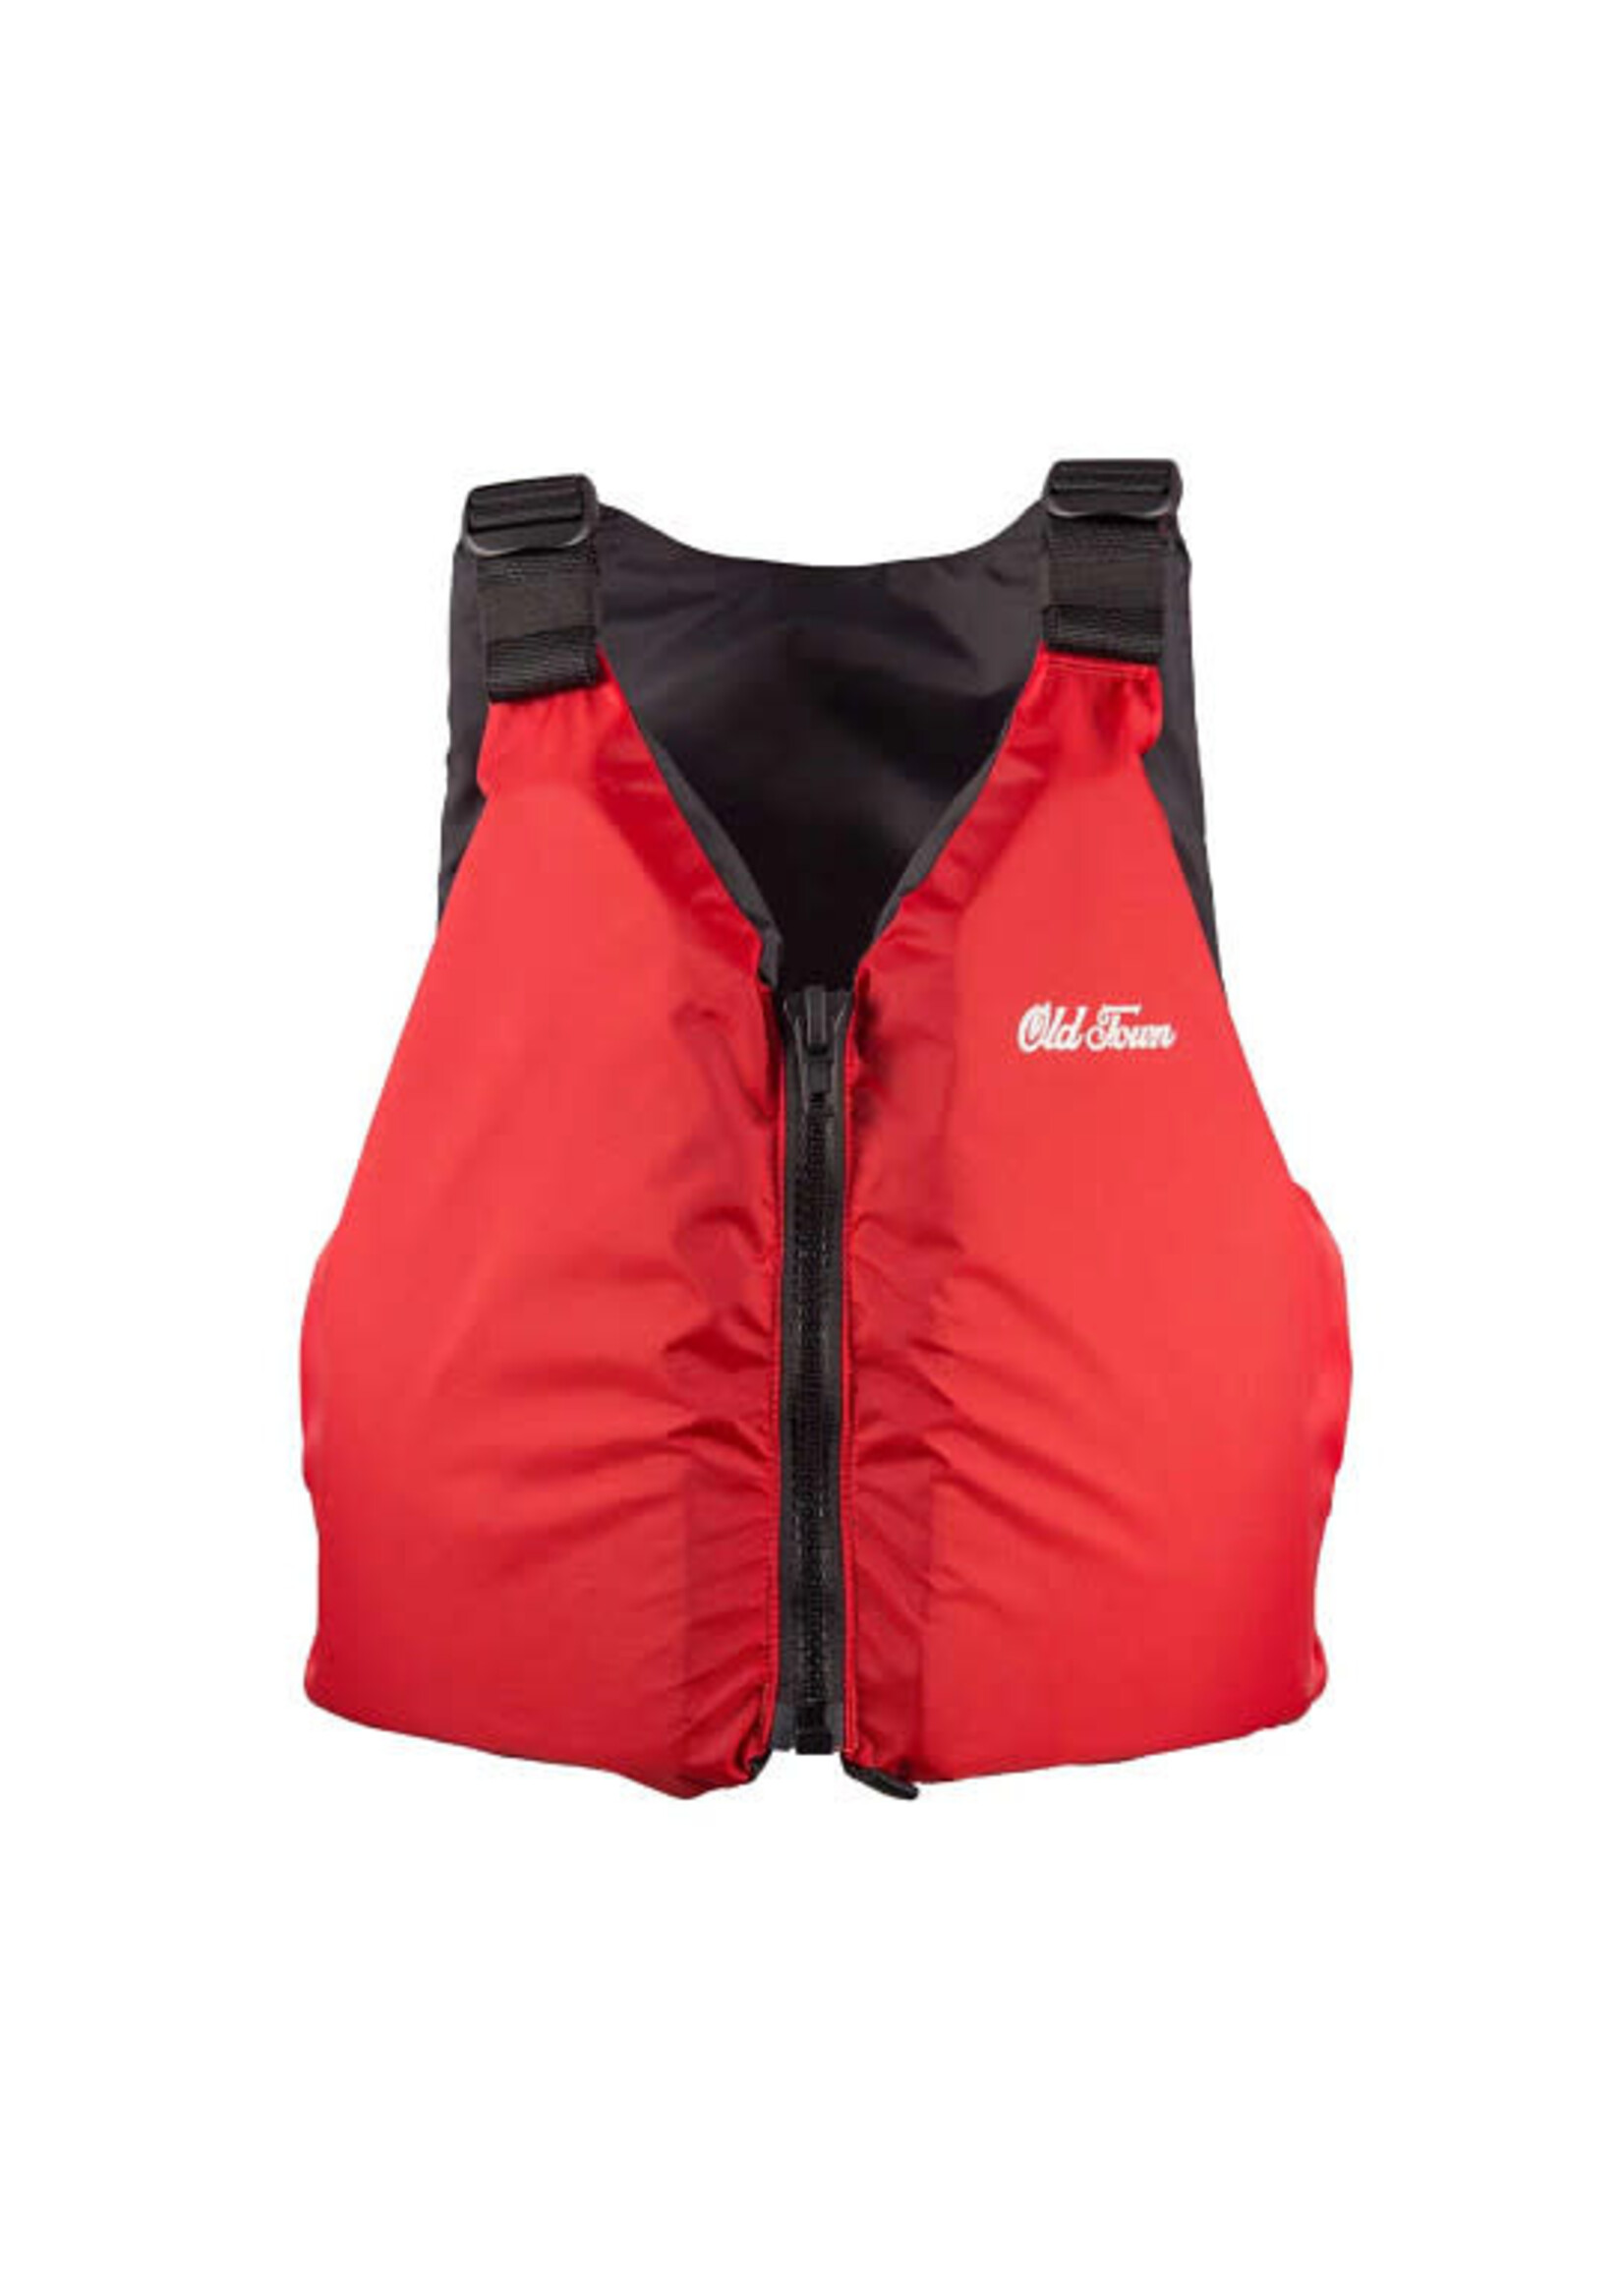 Johnson Outdoors PFD Outfitter Universal Red : 01.1332.9039